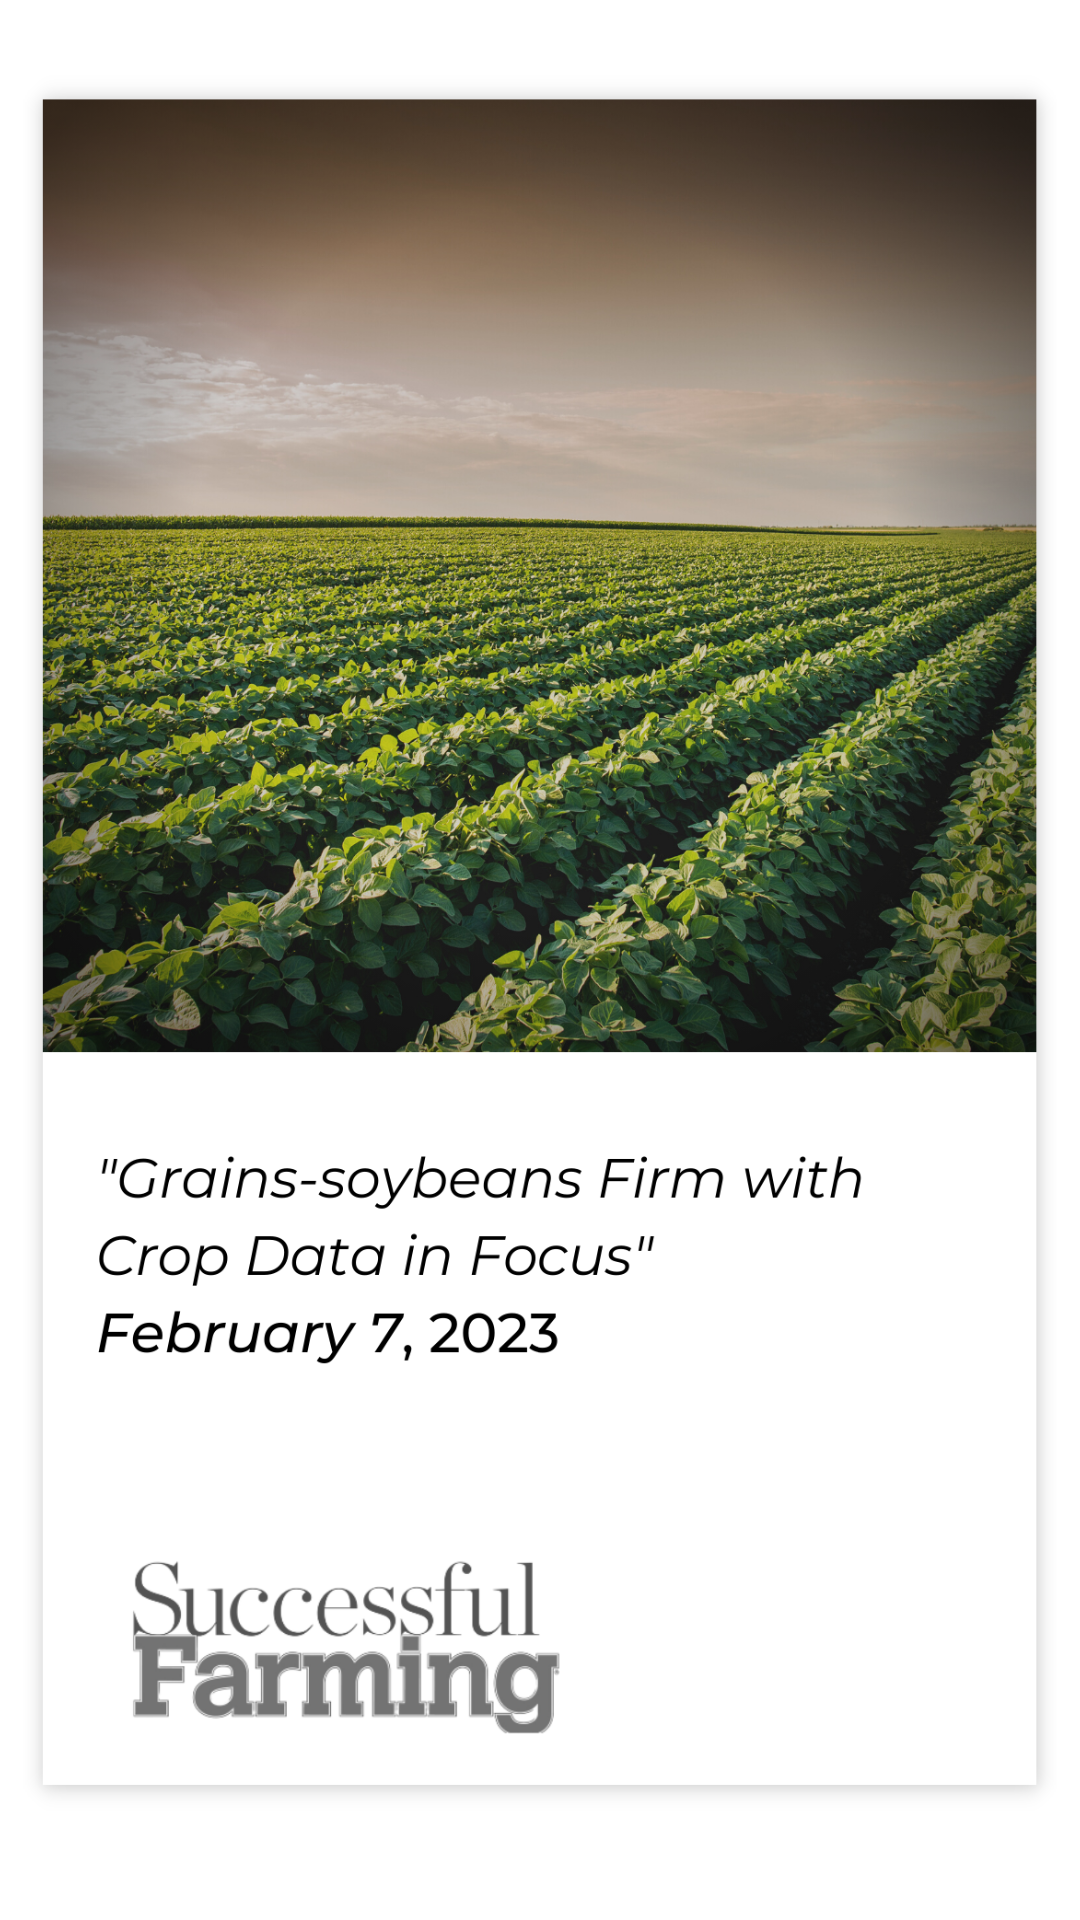 Grains-soybeans firm with crop data in focus